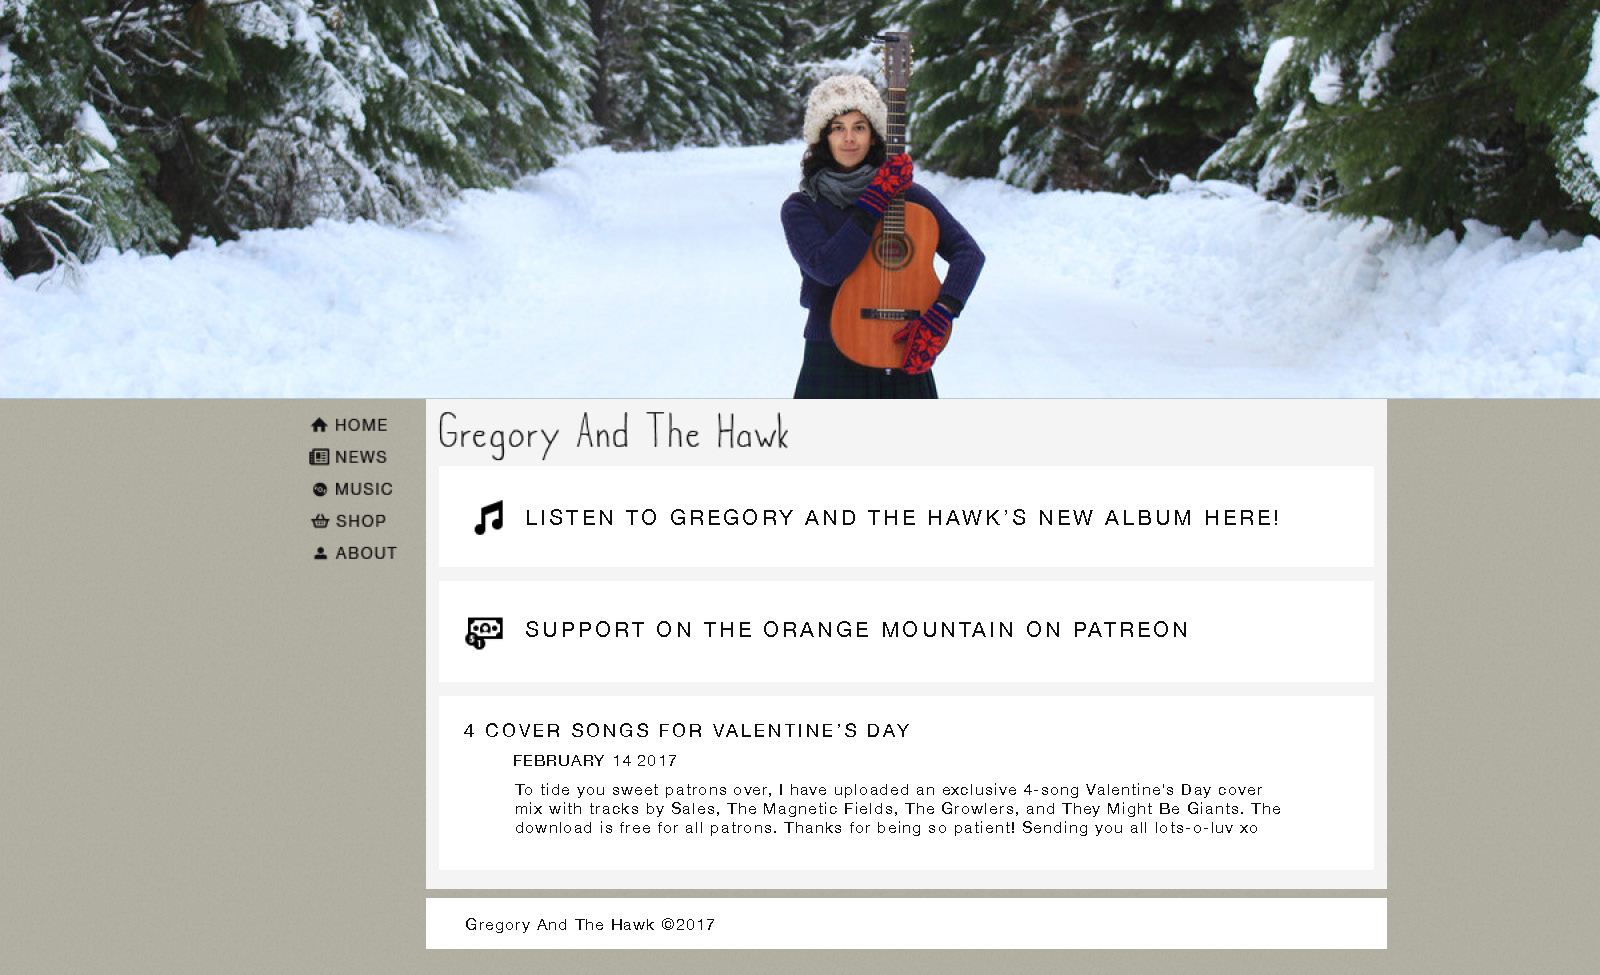 This is the home page design for the Gregory and the Hawk website. It features a header image, sidebar, and footer. The header image changes on every page, and this design features a photo of the artist standing in the snow with her guitar. The content of the page includes a link to listen to a preview of Gregory and the Hawk's upcoming album, a link to the Patreon, and the most recent article from the news page.